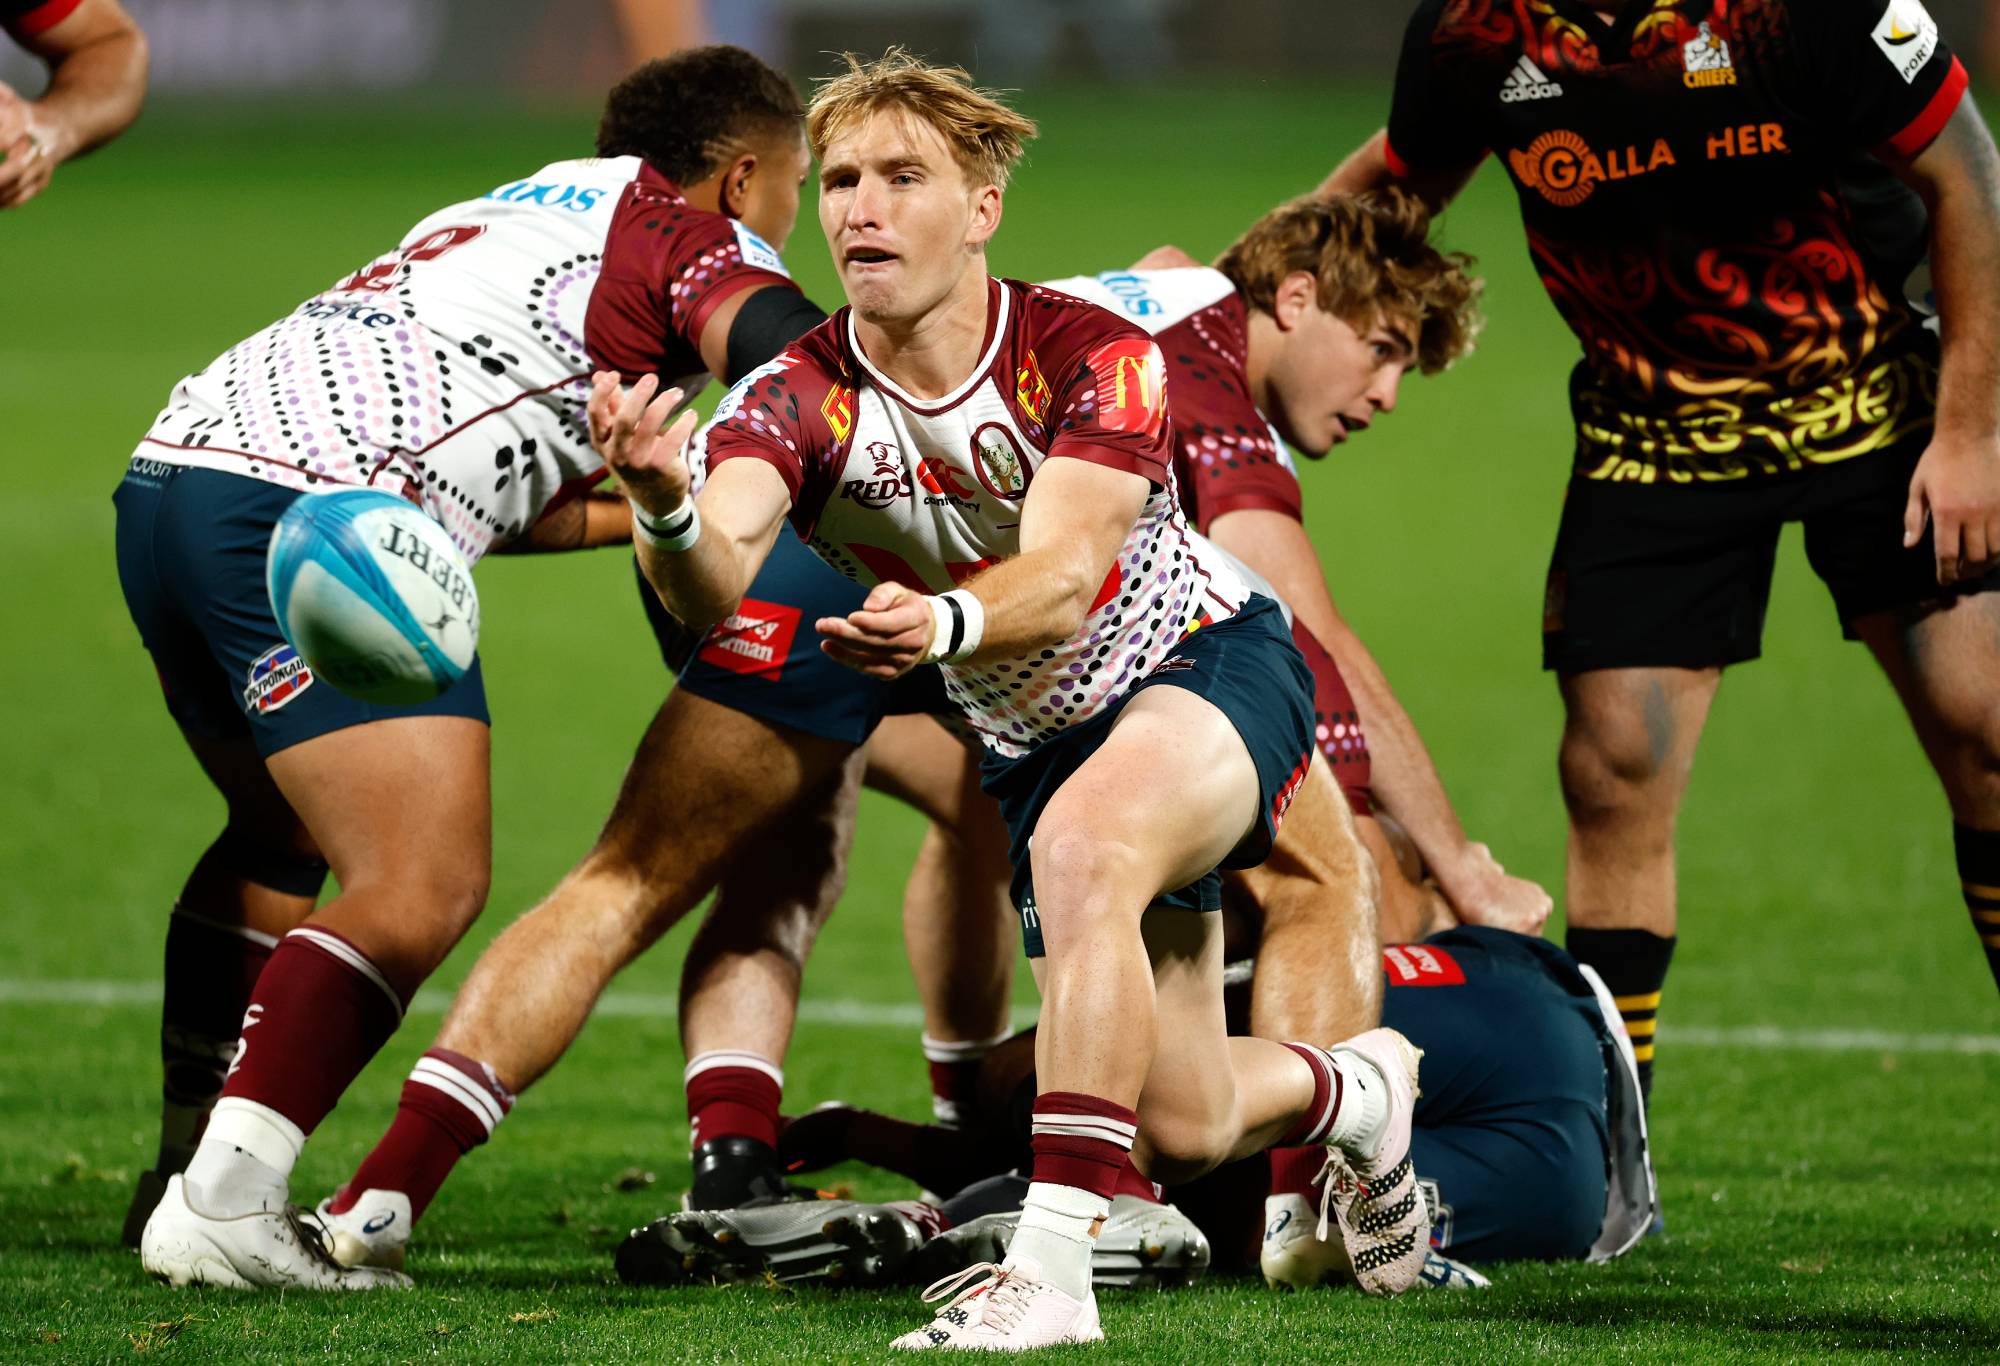 Tate McDermott of the Reds plays the ball during the Super Rugby Pacific Round 12 game between the Chiefs and Queensland Reds at Yarrow Stadium on May 12, 2023 in New Plymouth, New Zealand. (Photo by Andy Jackson/Getty Images)